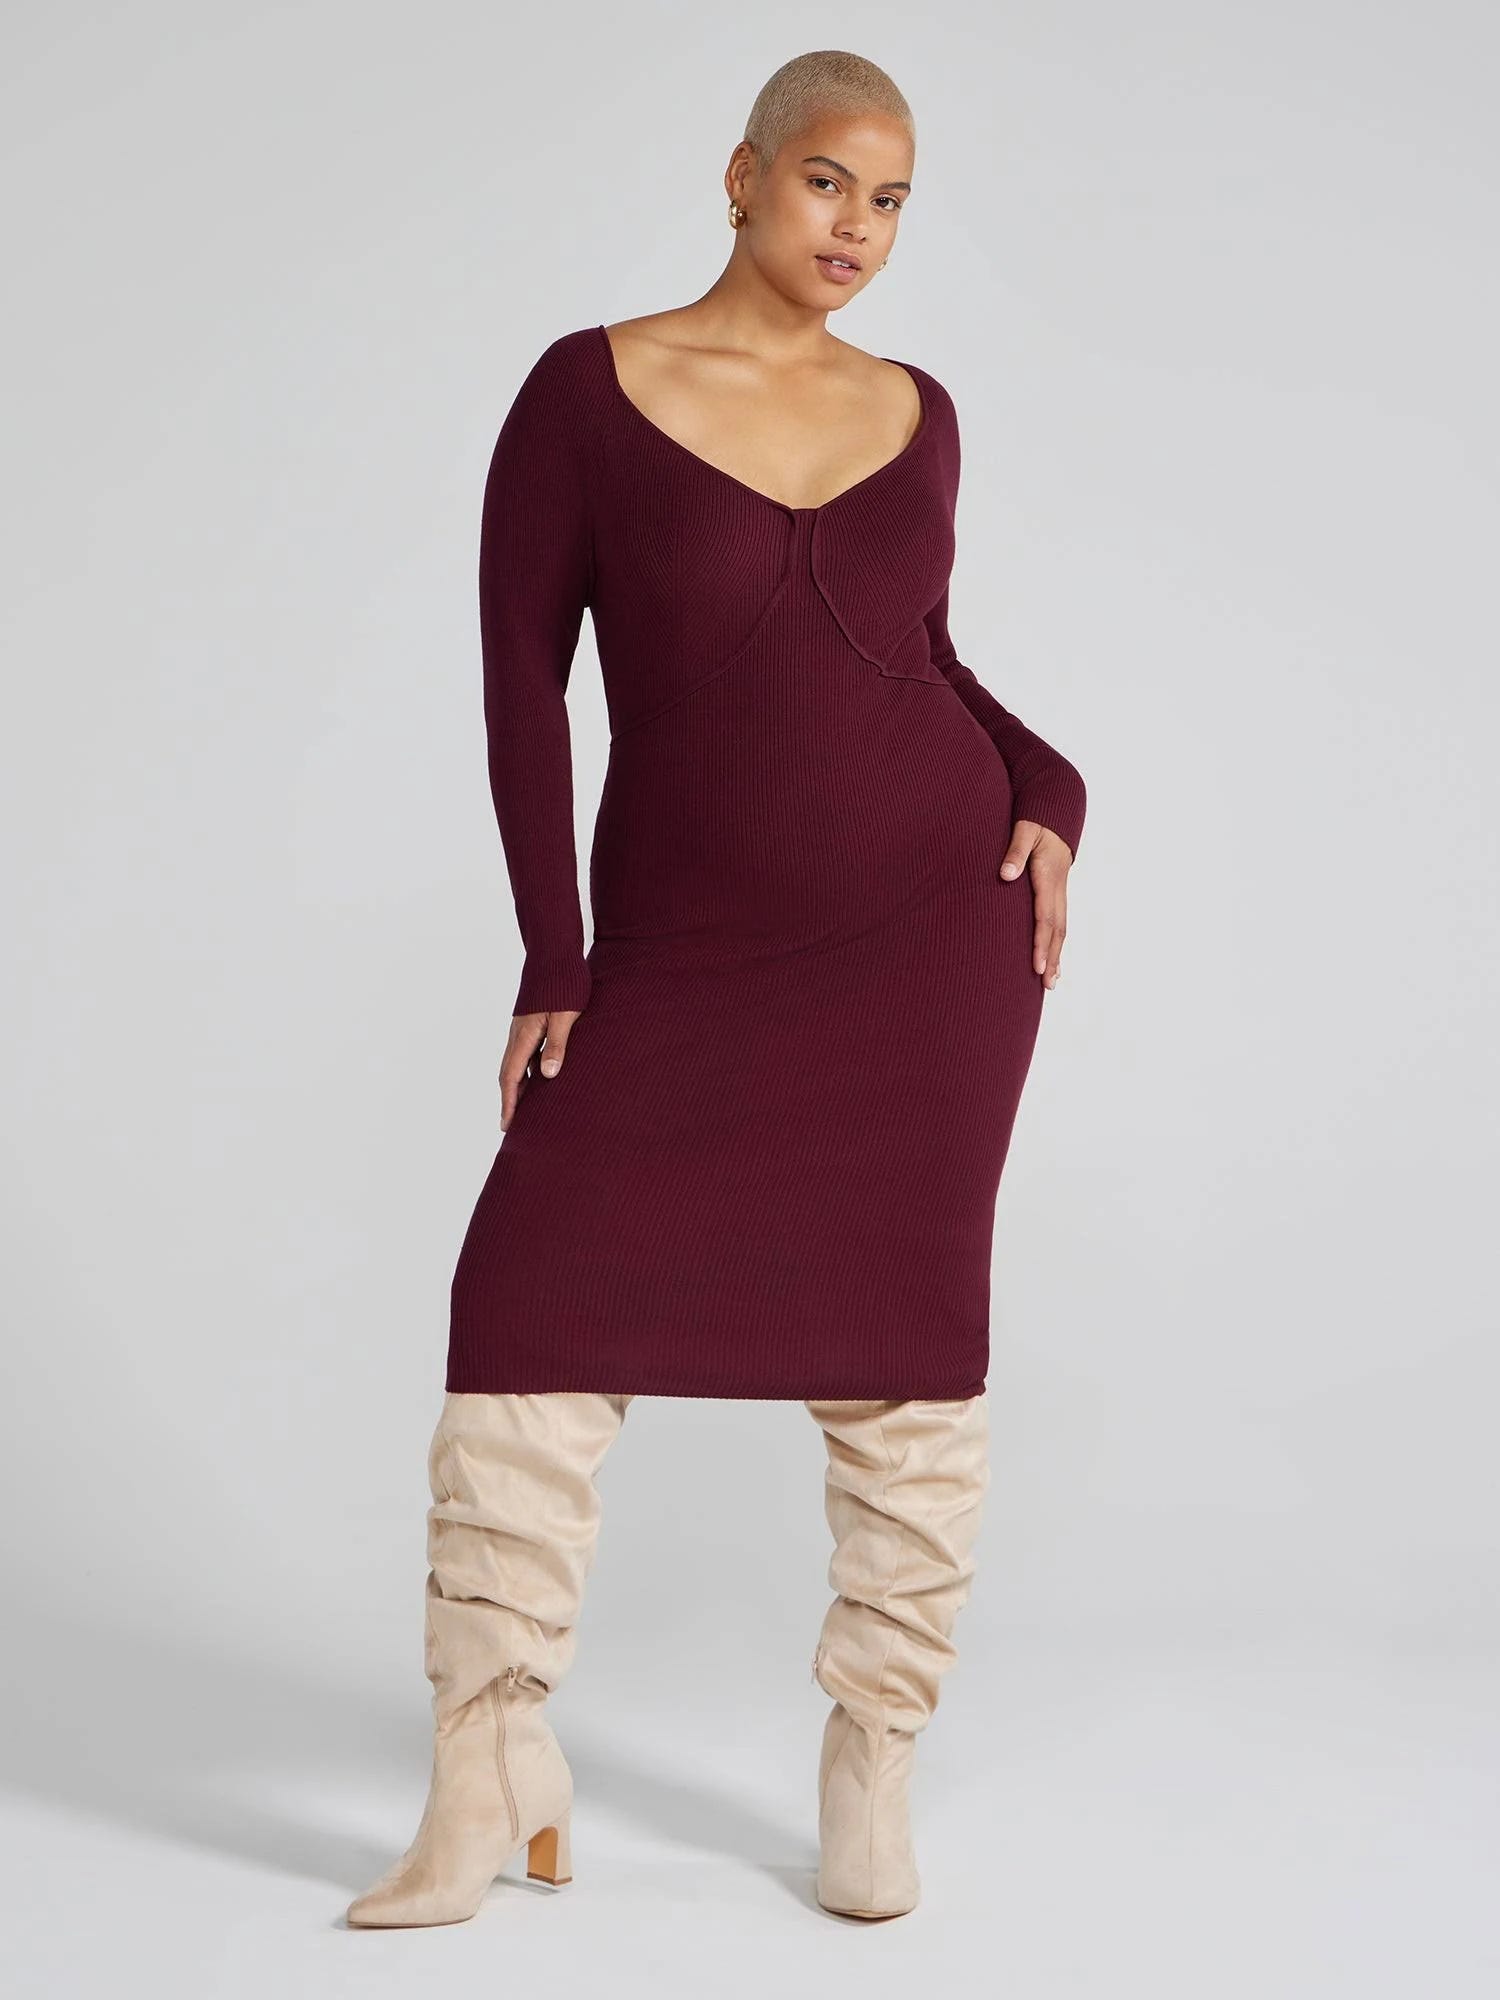 Affordable Wide Width Faux Suede Thigh-High Boots for Curvy Bodies | Image